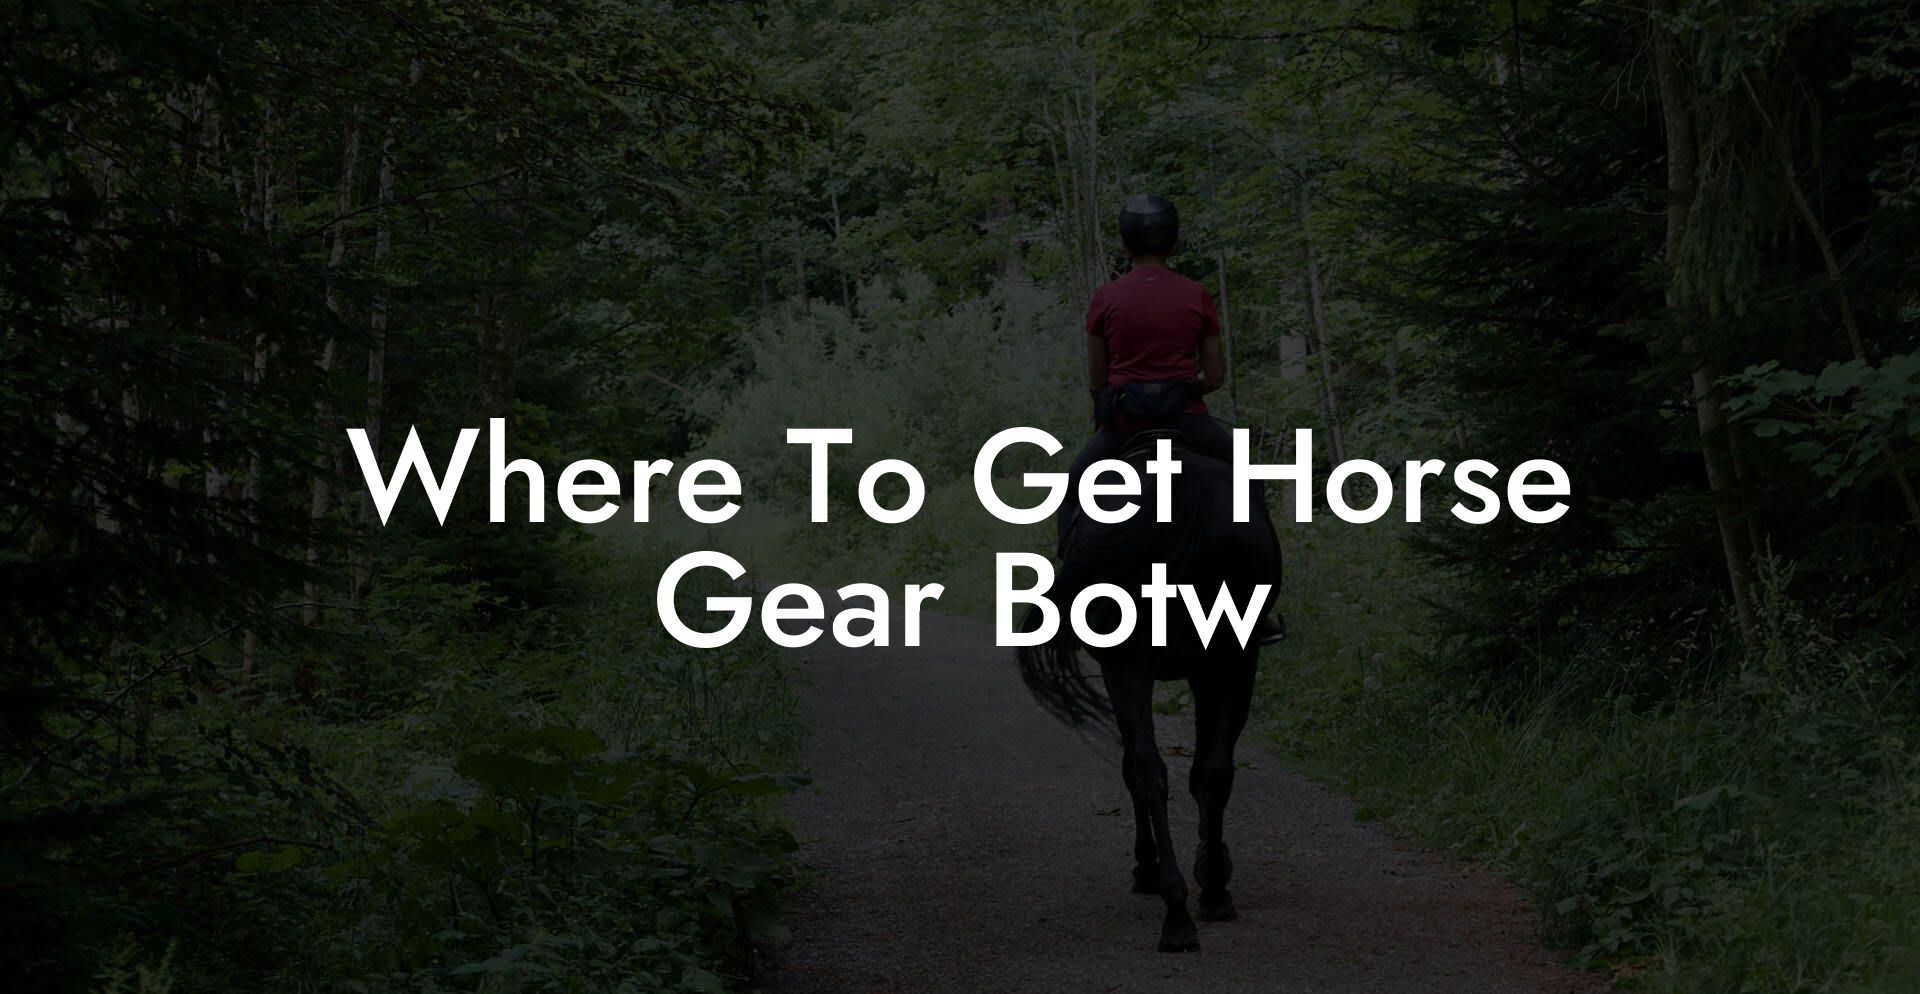 Where To Get Horse Gear Botw